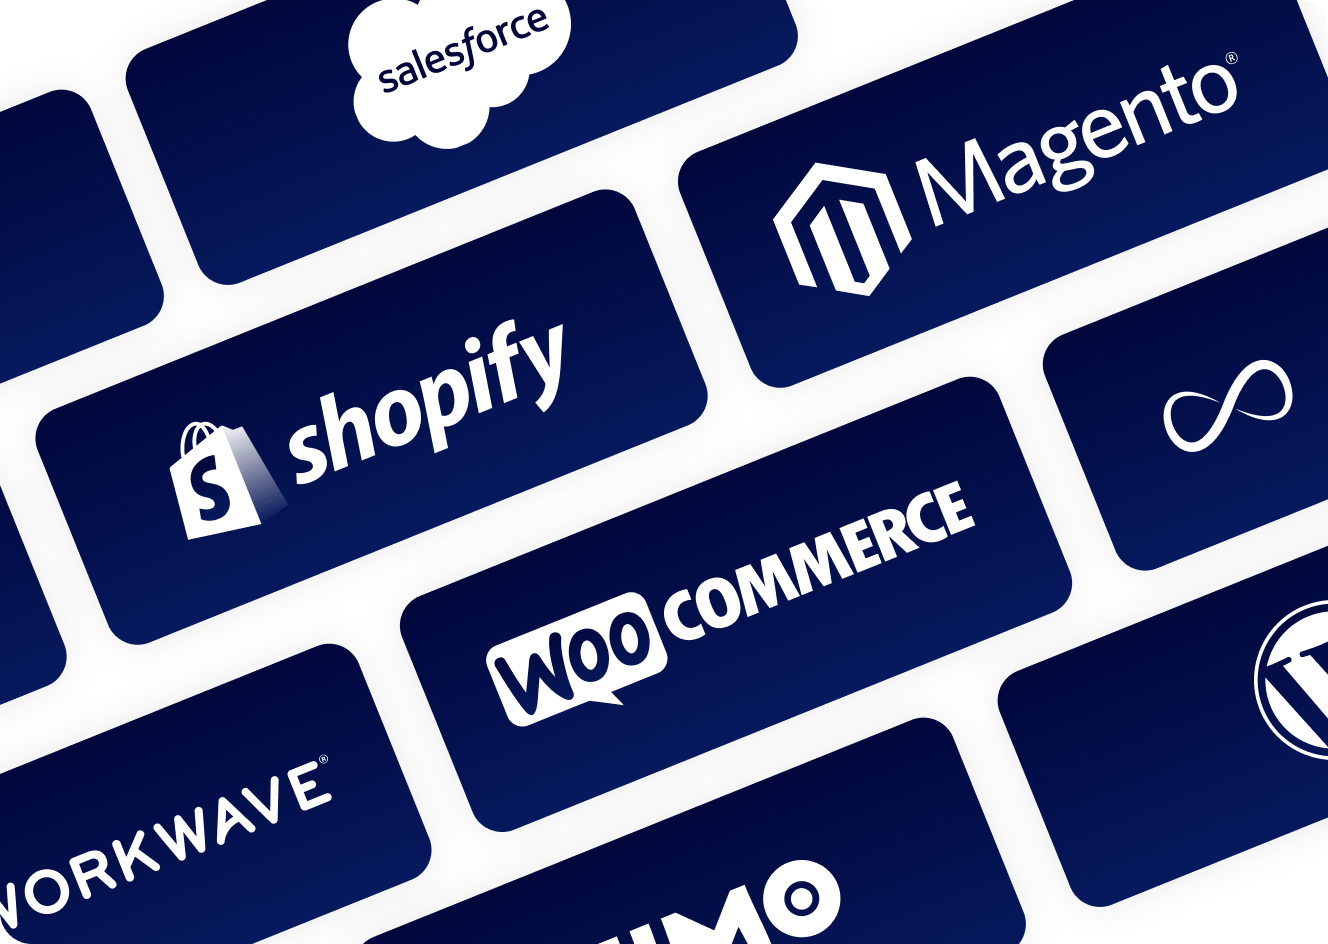 Connect your e-Commerce store in a flash